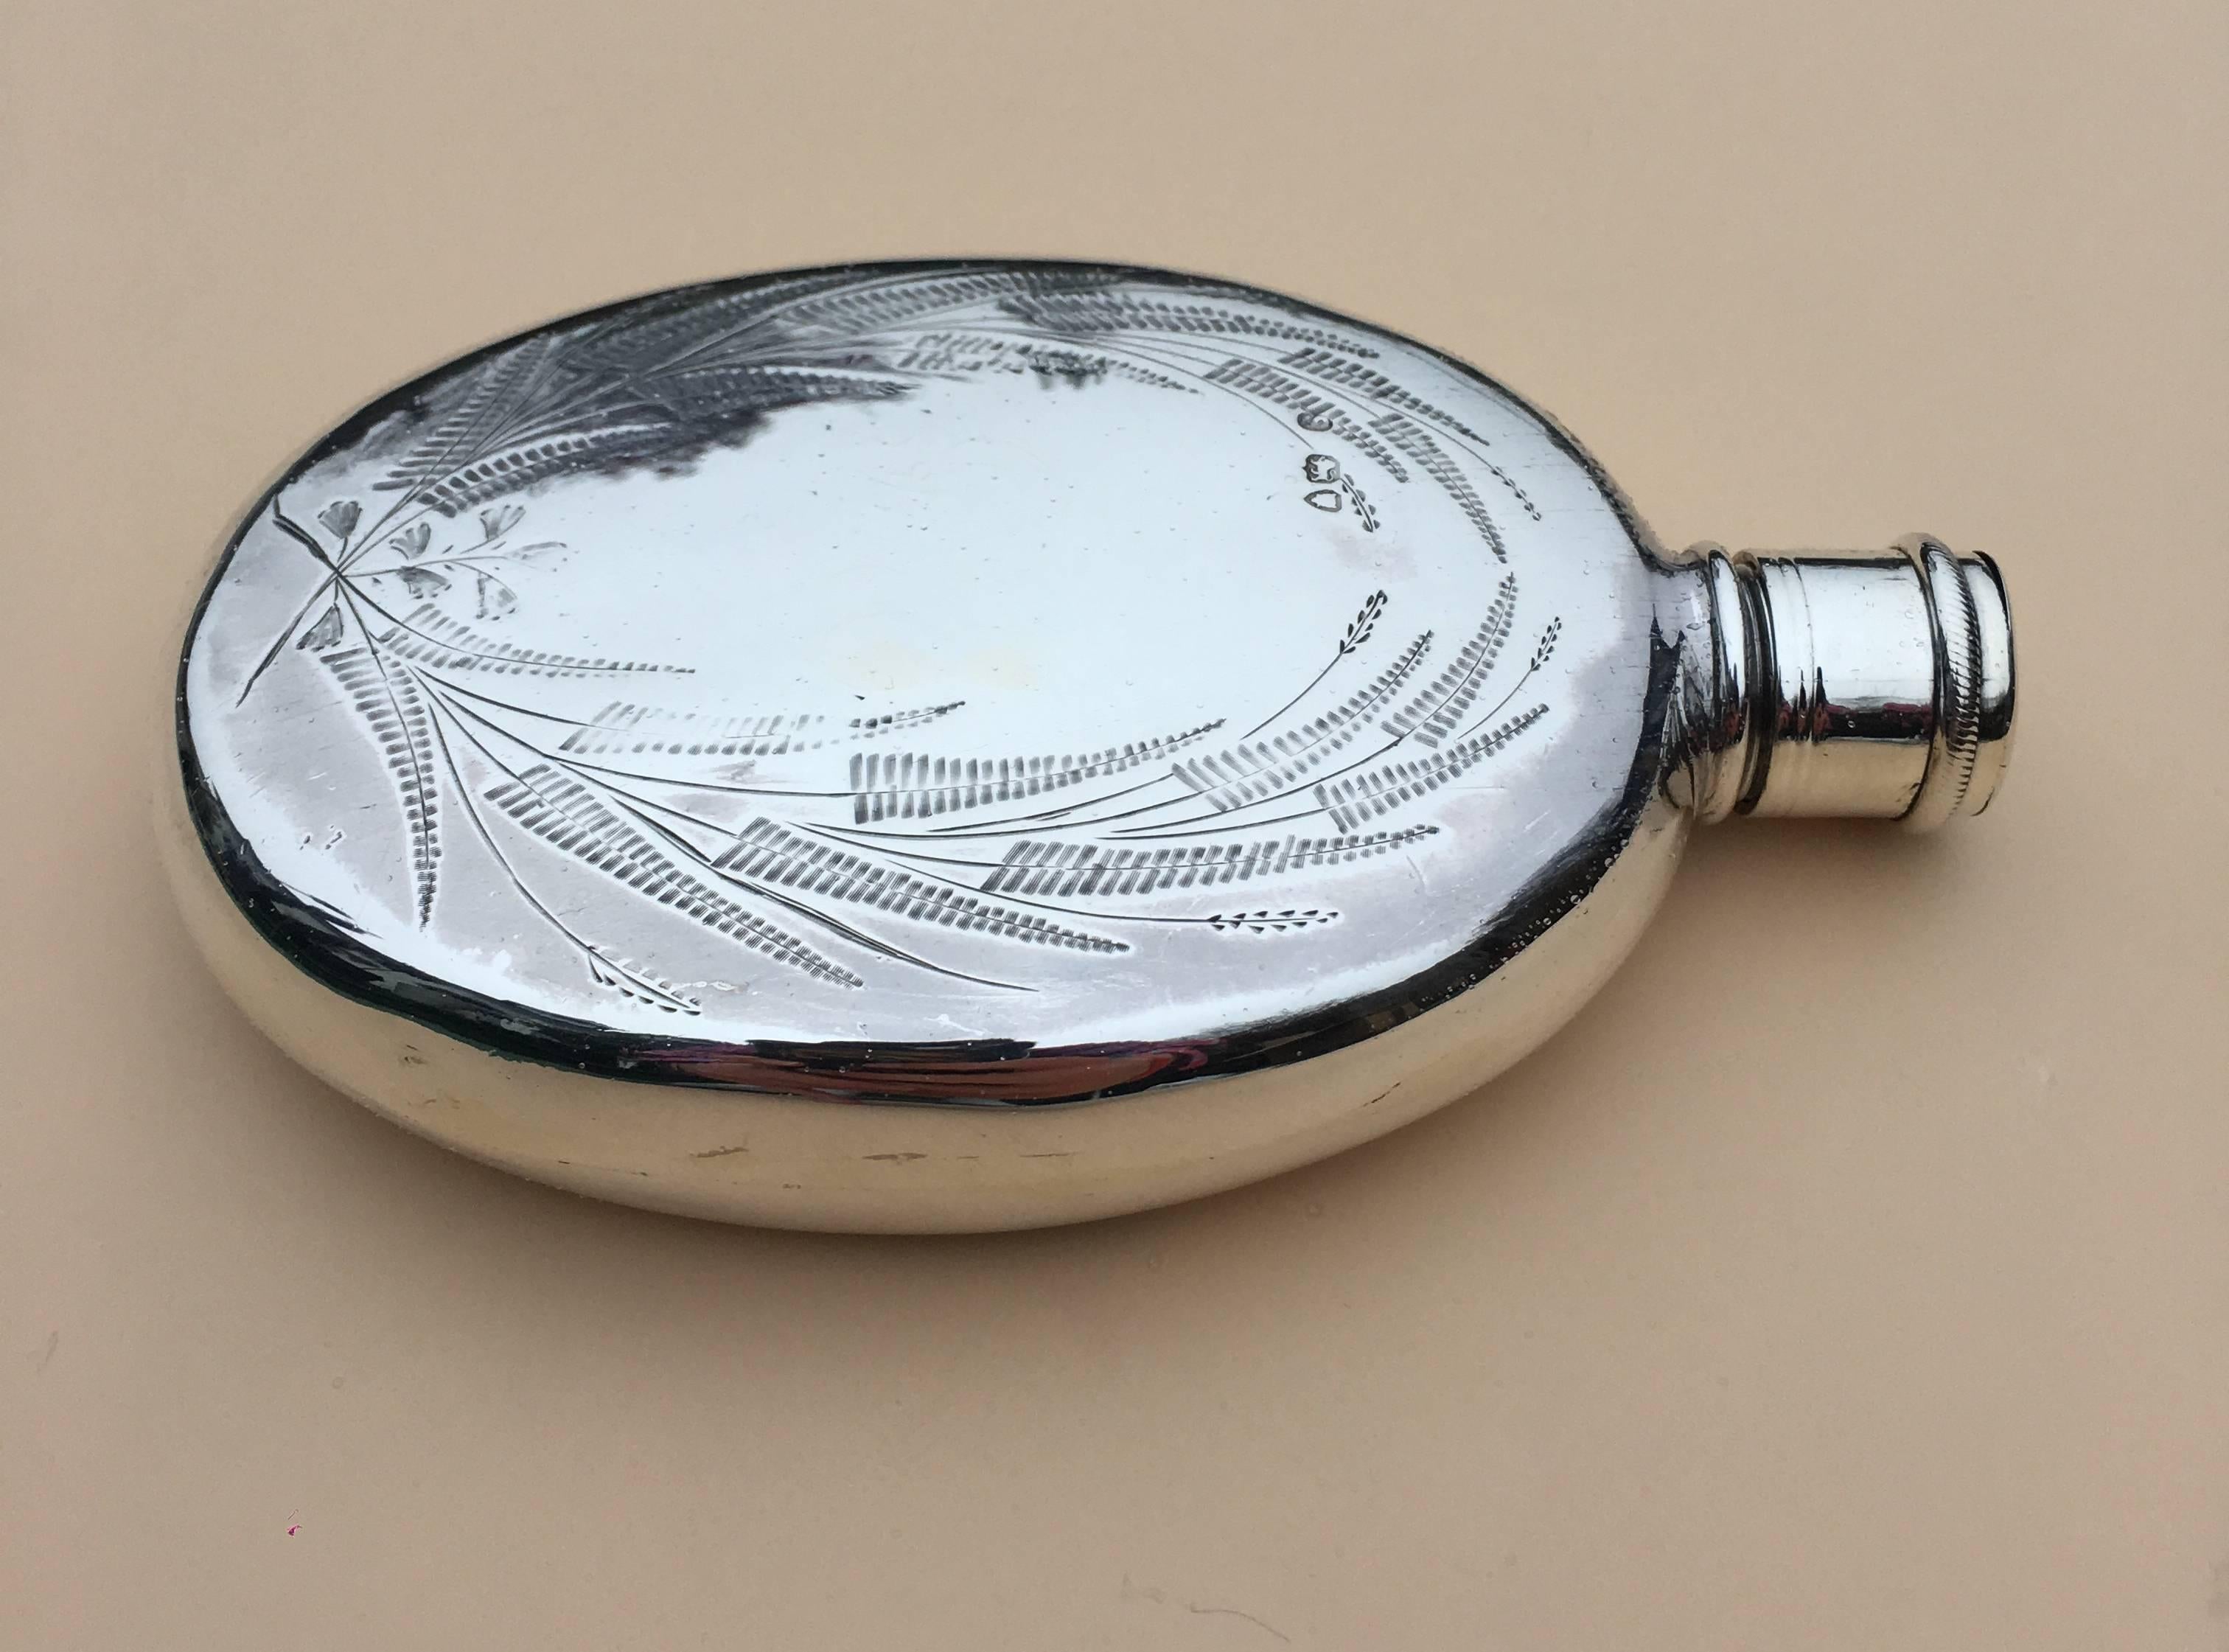 Engraved Arts and Crafts Aesthetic Movement Silver Hip or Pocket Flask, 1871